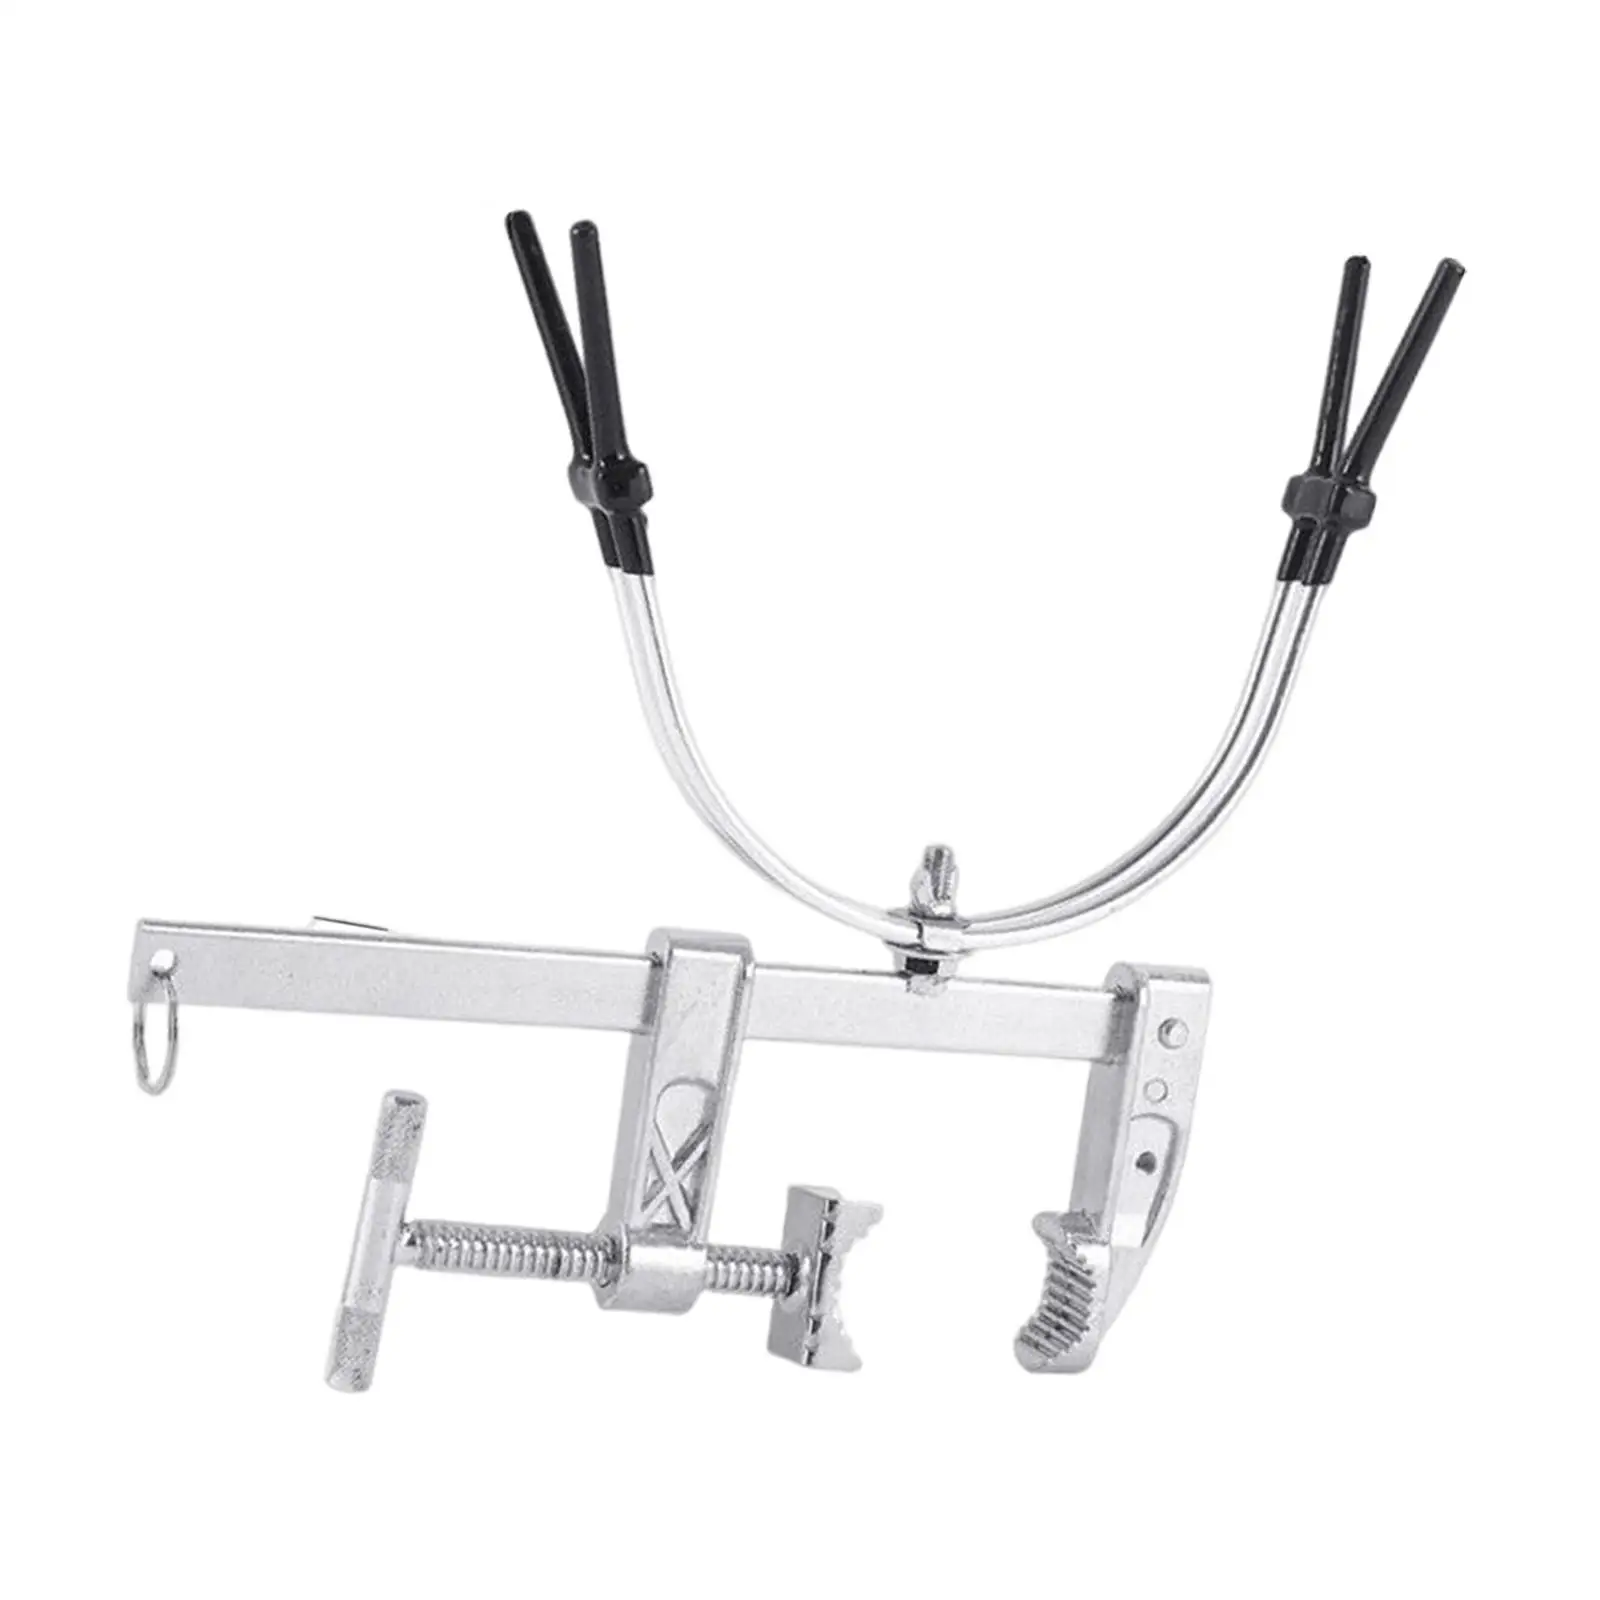 Metal Fishing Rod Bracket Solid Fishing Gear Multi Directional Adjustment Support Stand Stable Rack Pole Holder for Boat Fishing